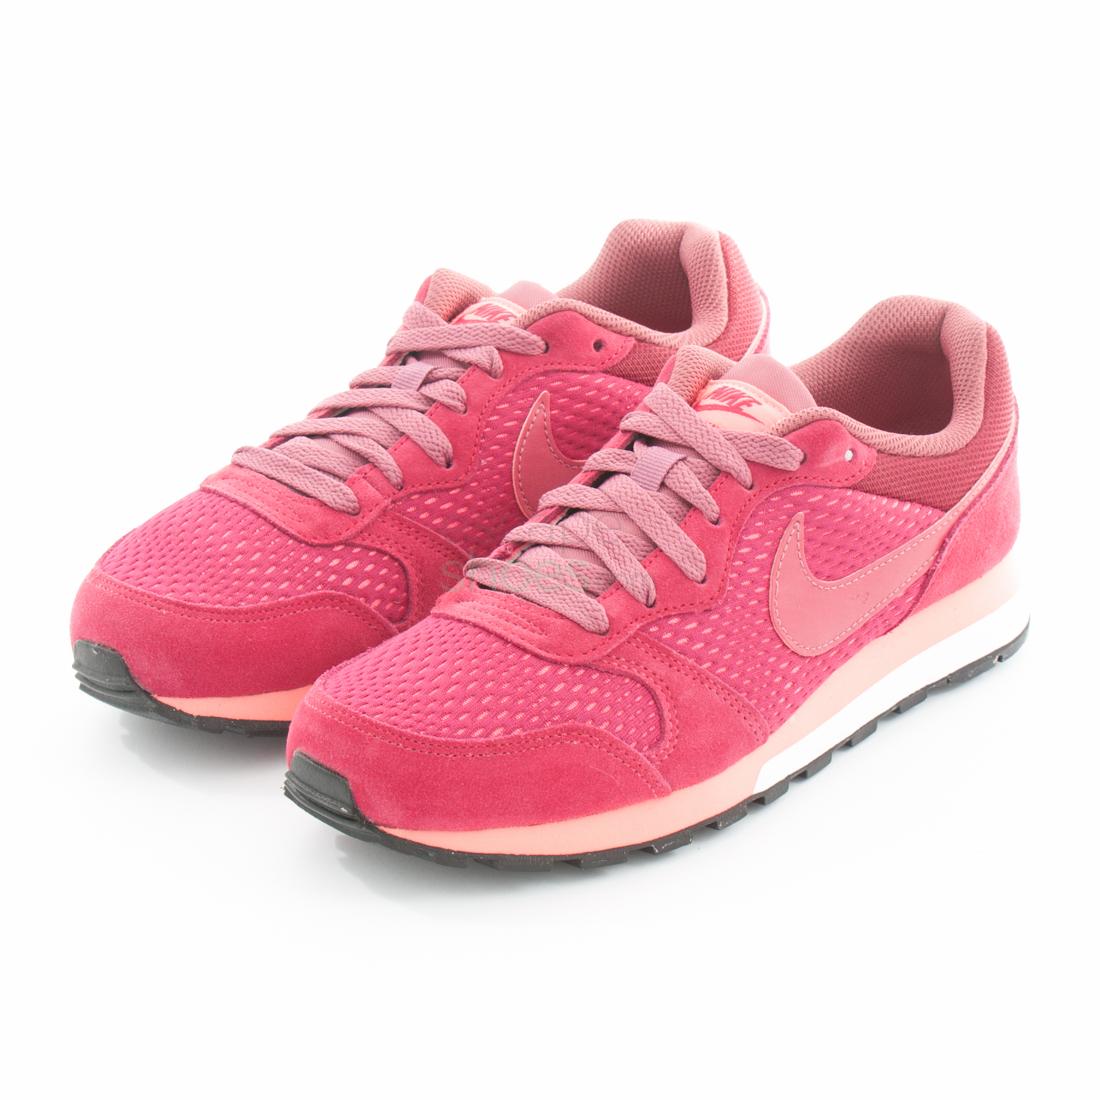 Zapatillas NIKE MD Runner Noble Red 749869 601